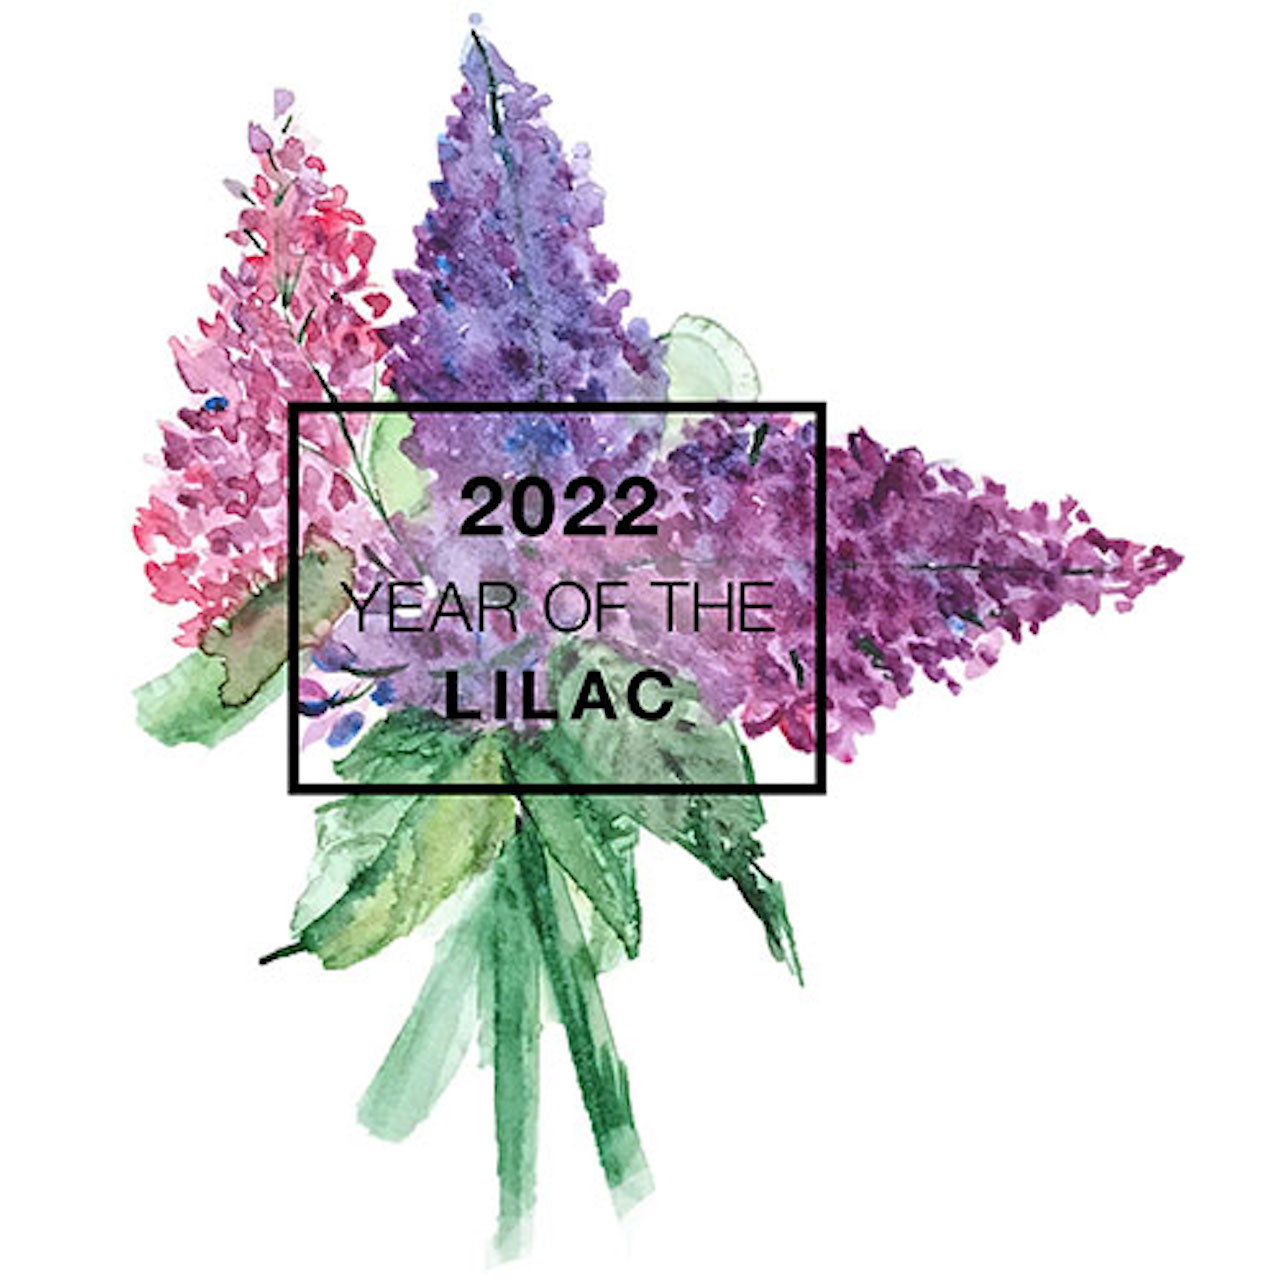 Water color of lilac flowers, written over top is 2022, year of the lilac.